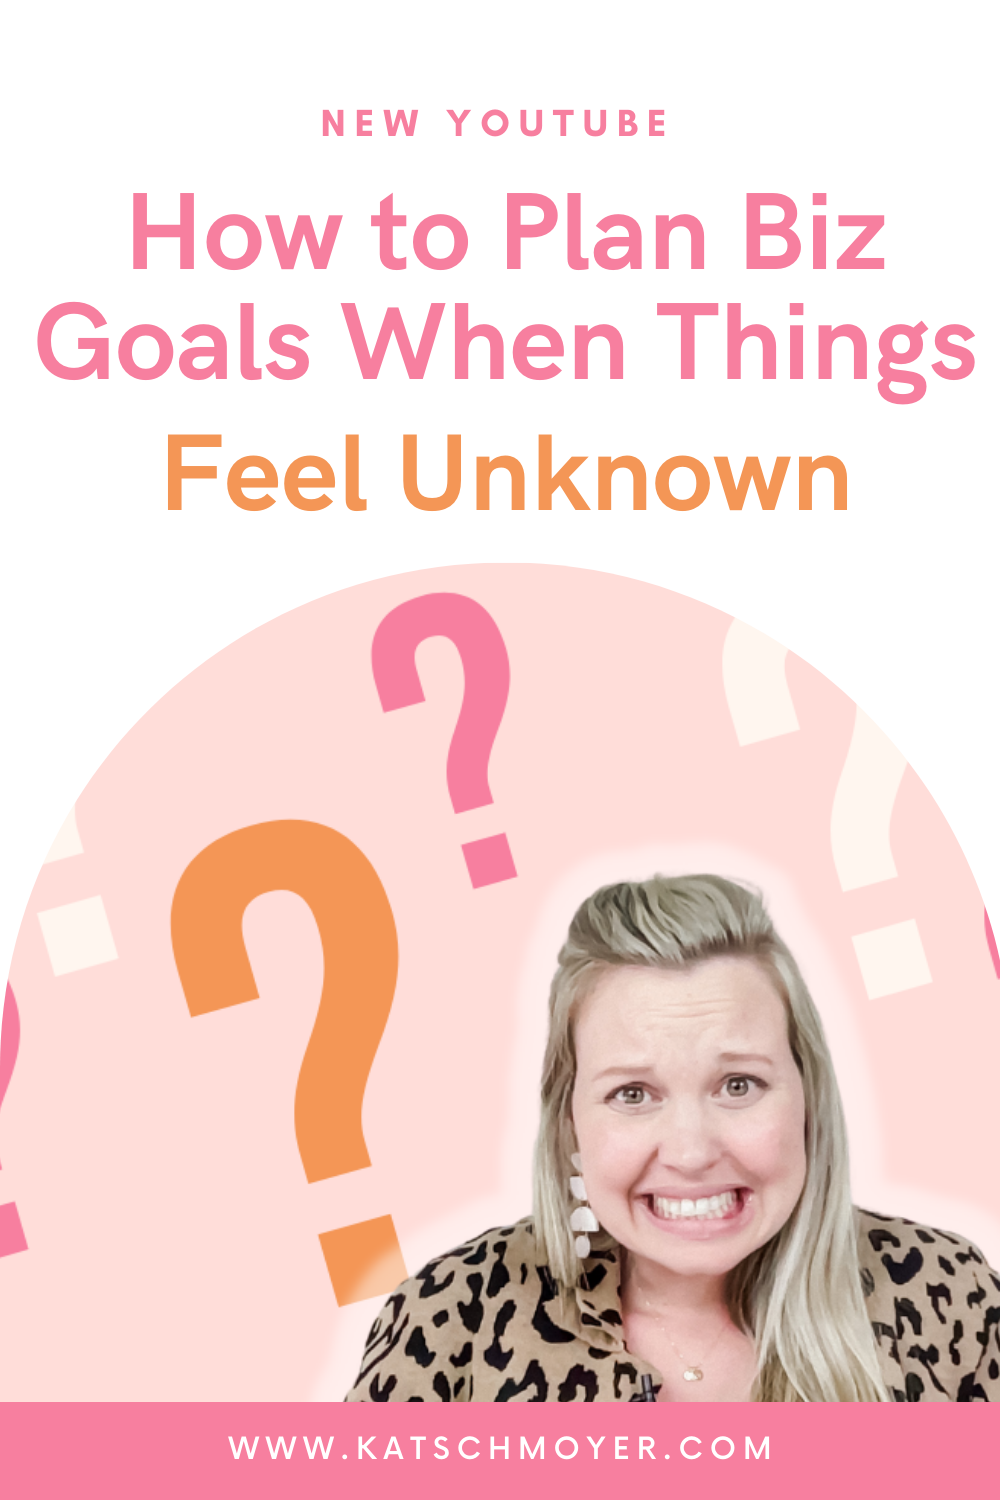 How to Plan Biz Goals when Things Feel Unknown